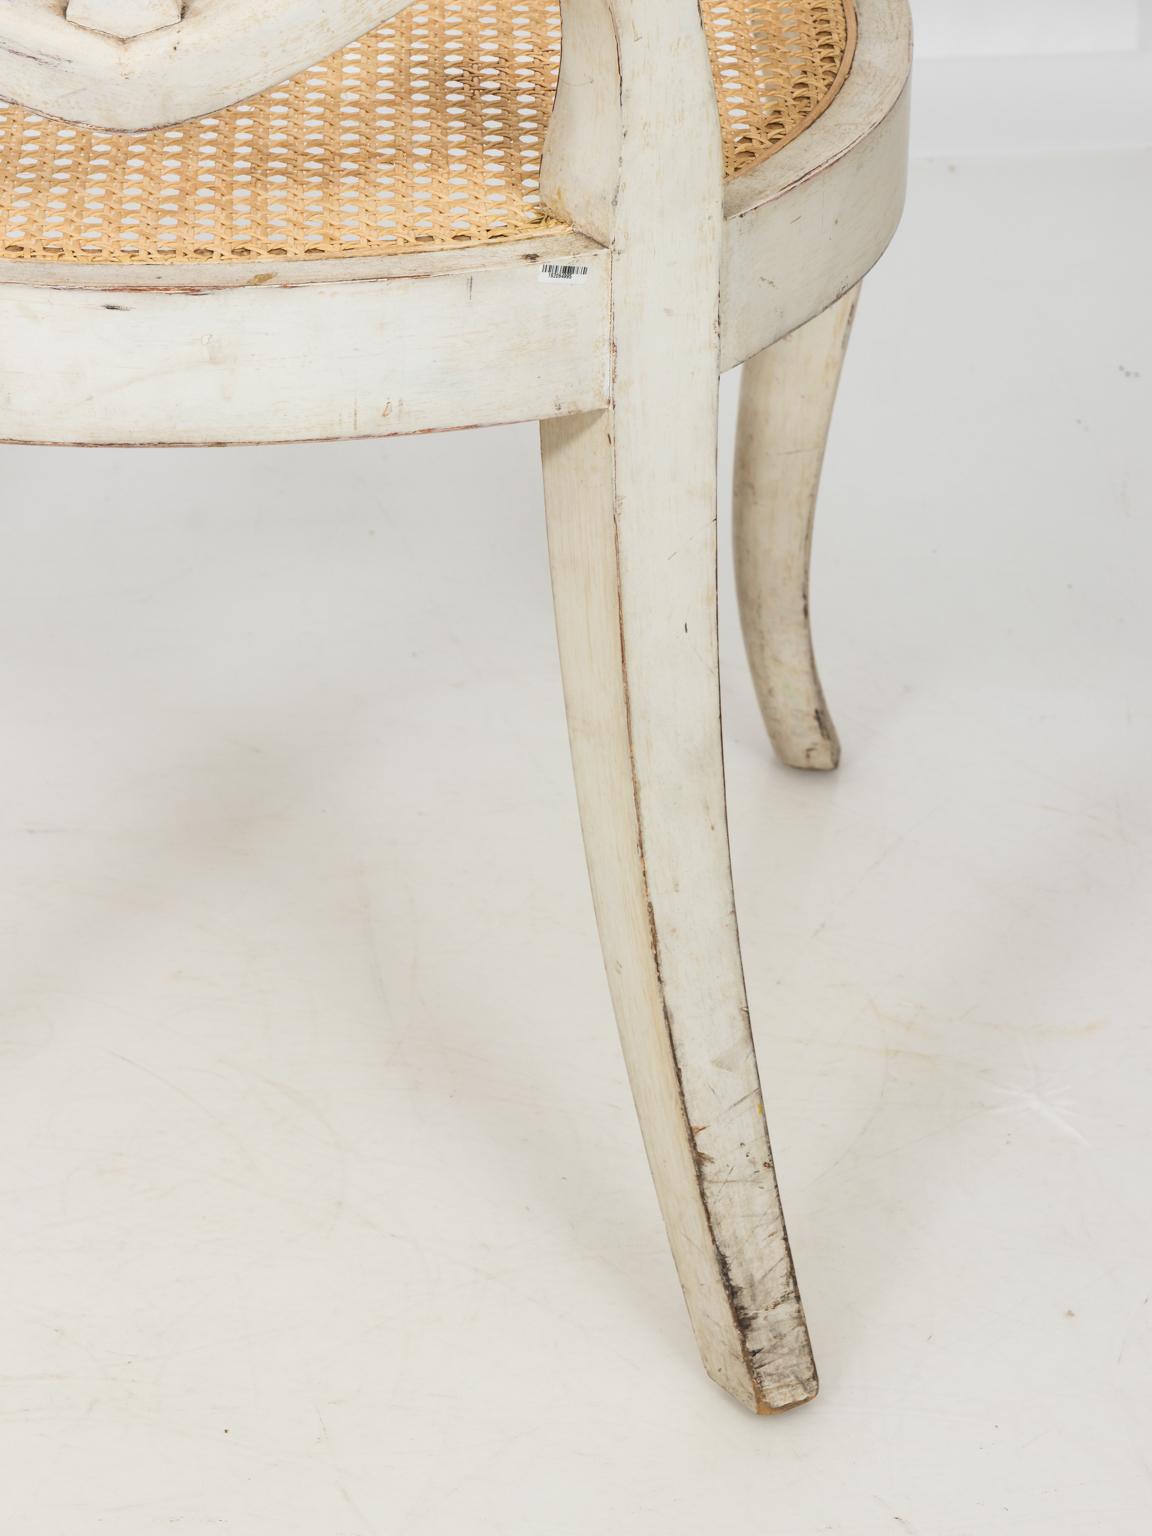 White painted Scandinavian armchairs in the neoclassical style with ribbon back, cane seating, and cabriole legs. Please note of wear to the arms and legs due to daily use causing minor paint loss. The seat rail of one chair also has minor paint